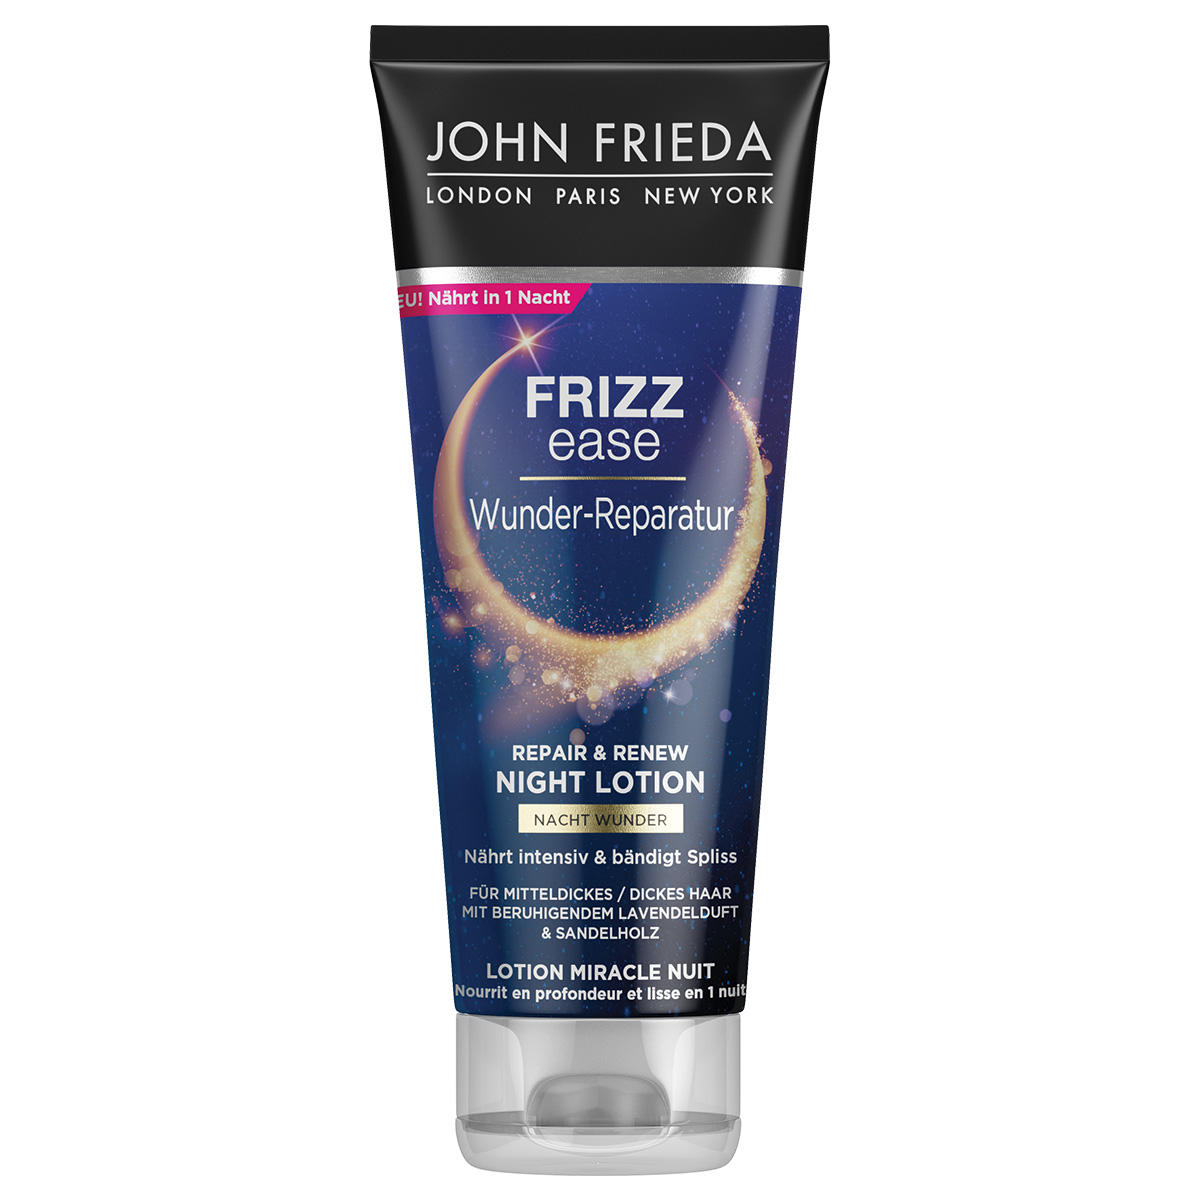 JOHN FRIEDA Frizz Ease Miracle Repair Lozione Notte Riparatrice e Rinnovatrice 100 ml - 1